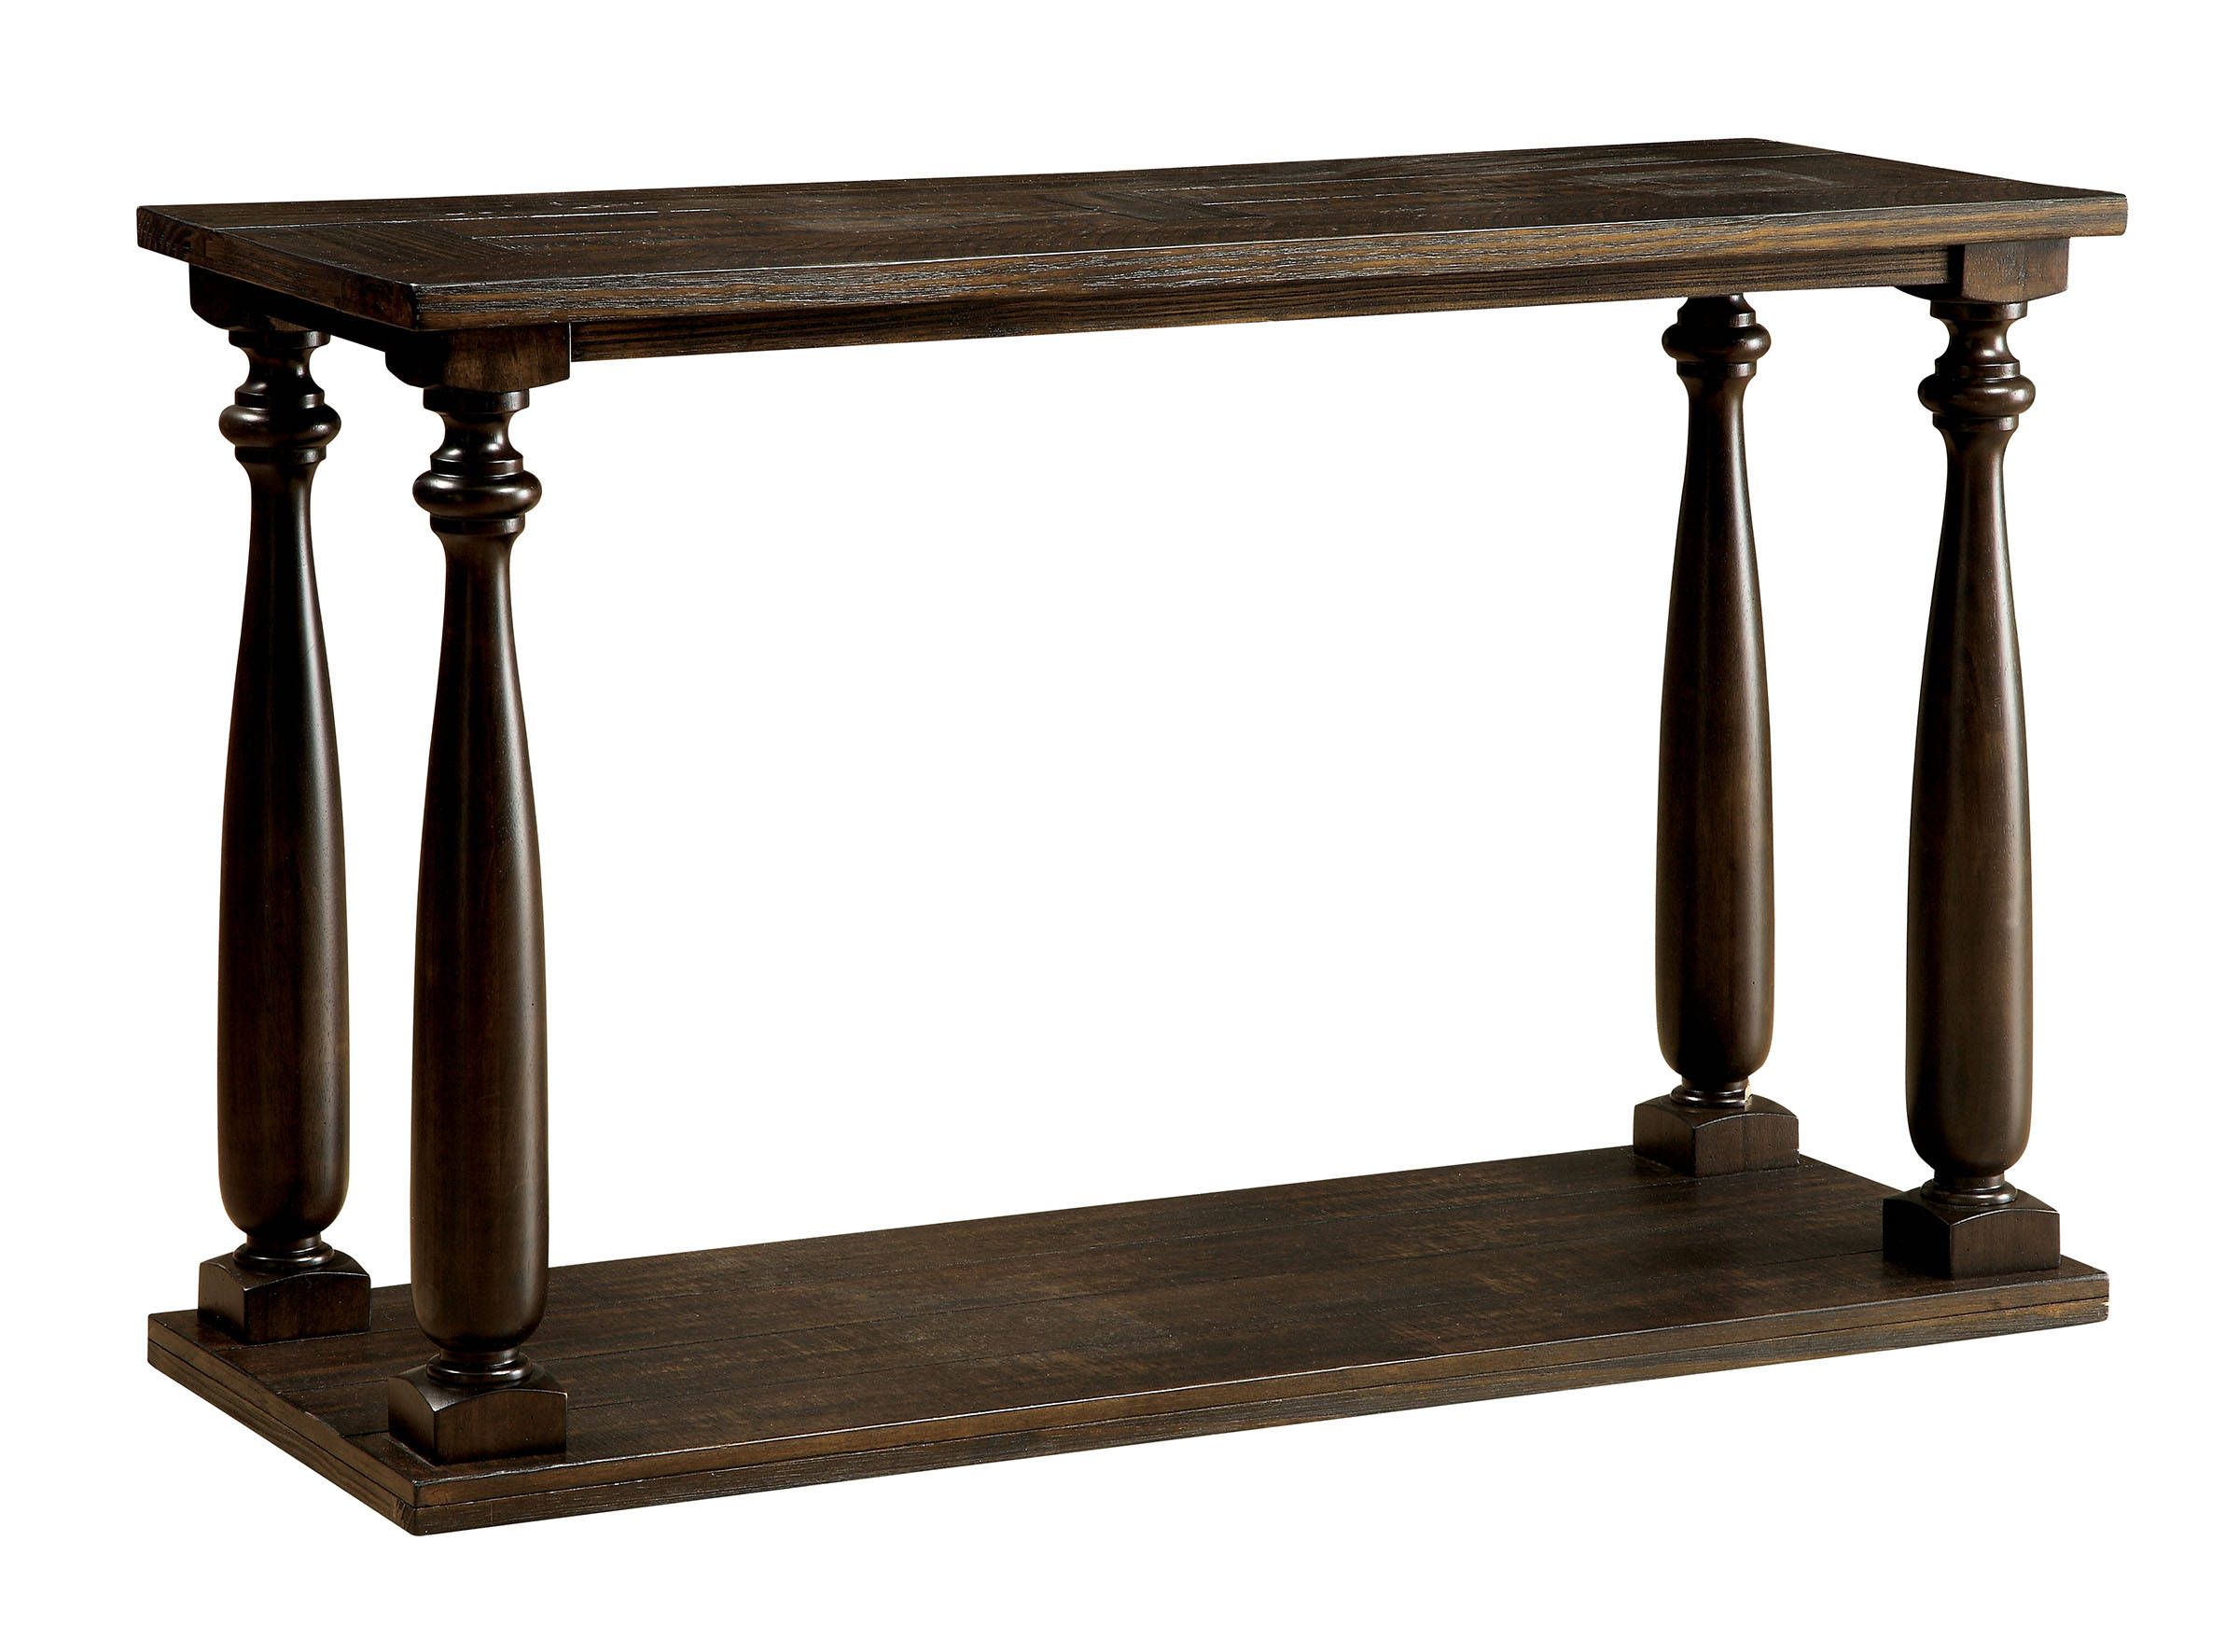 Luannfurniture Of America Cm4420s Sofa Table In Dark Walnut Intended For Dark Walnut Console Tables (View 2 of 20)